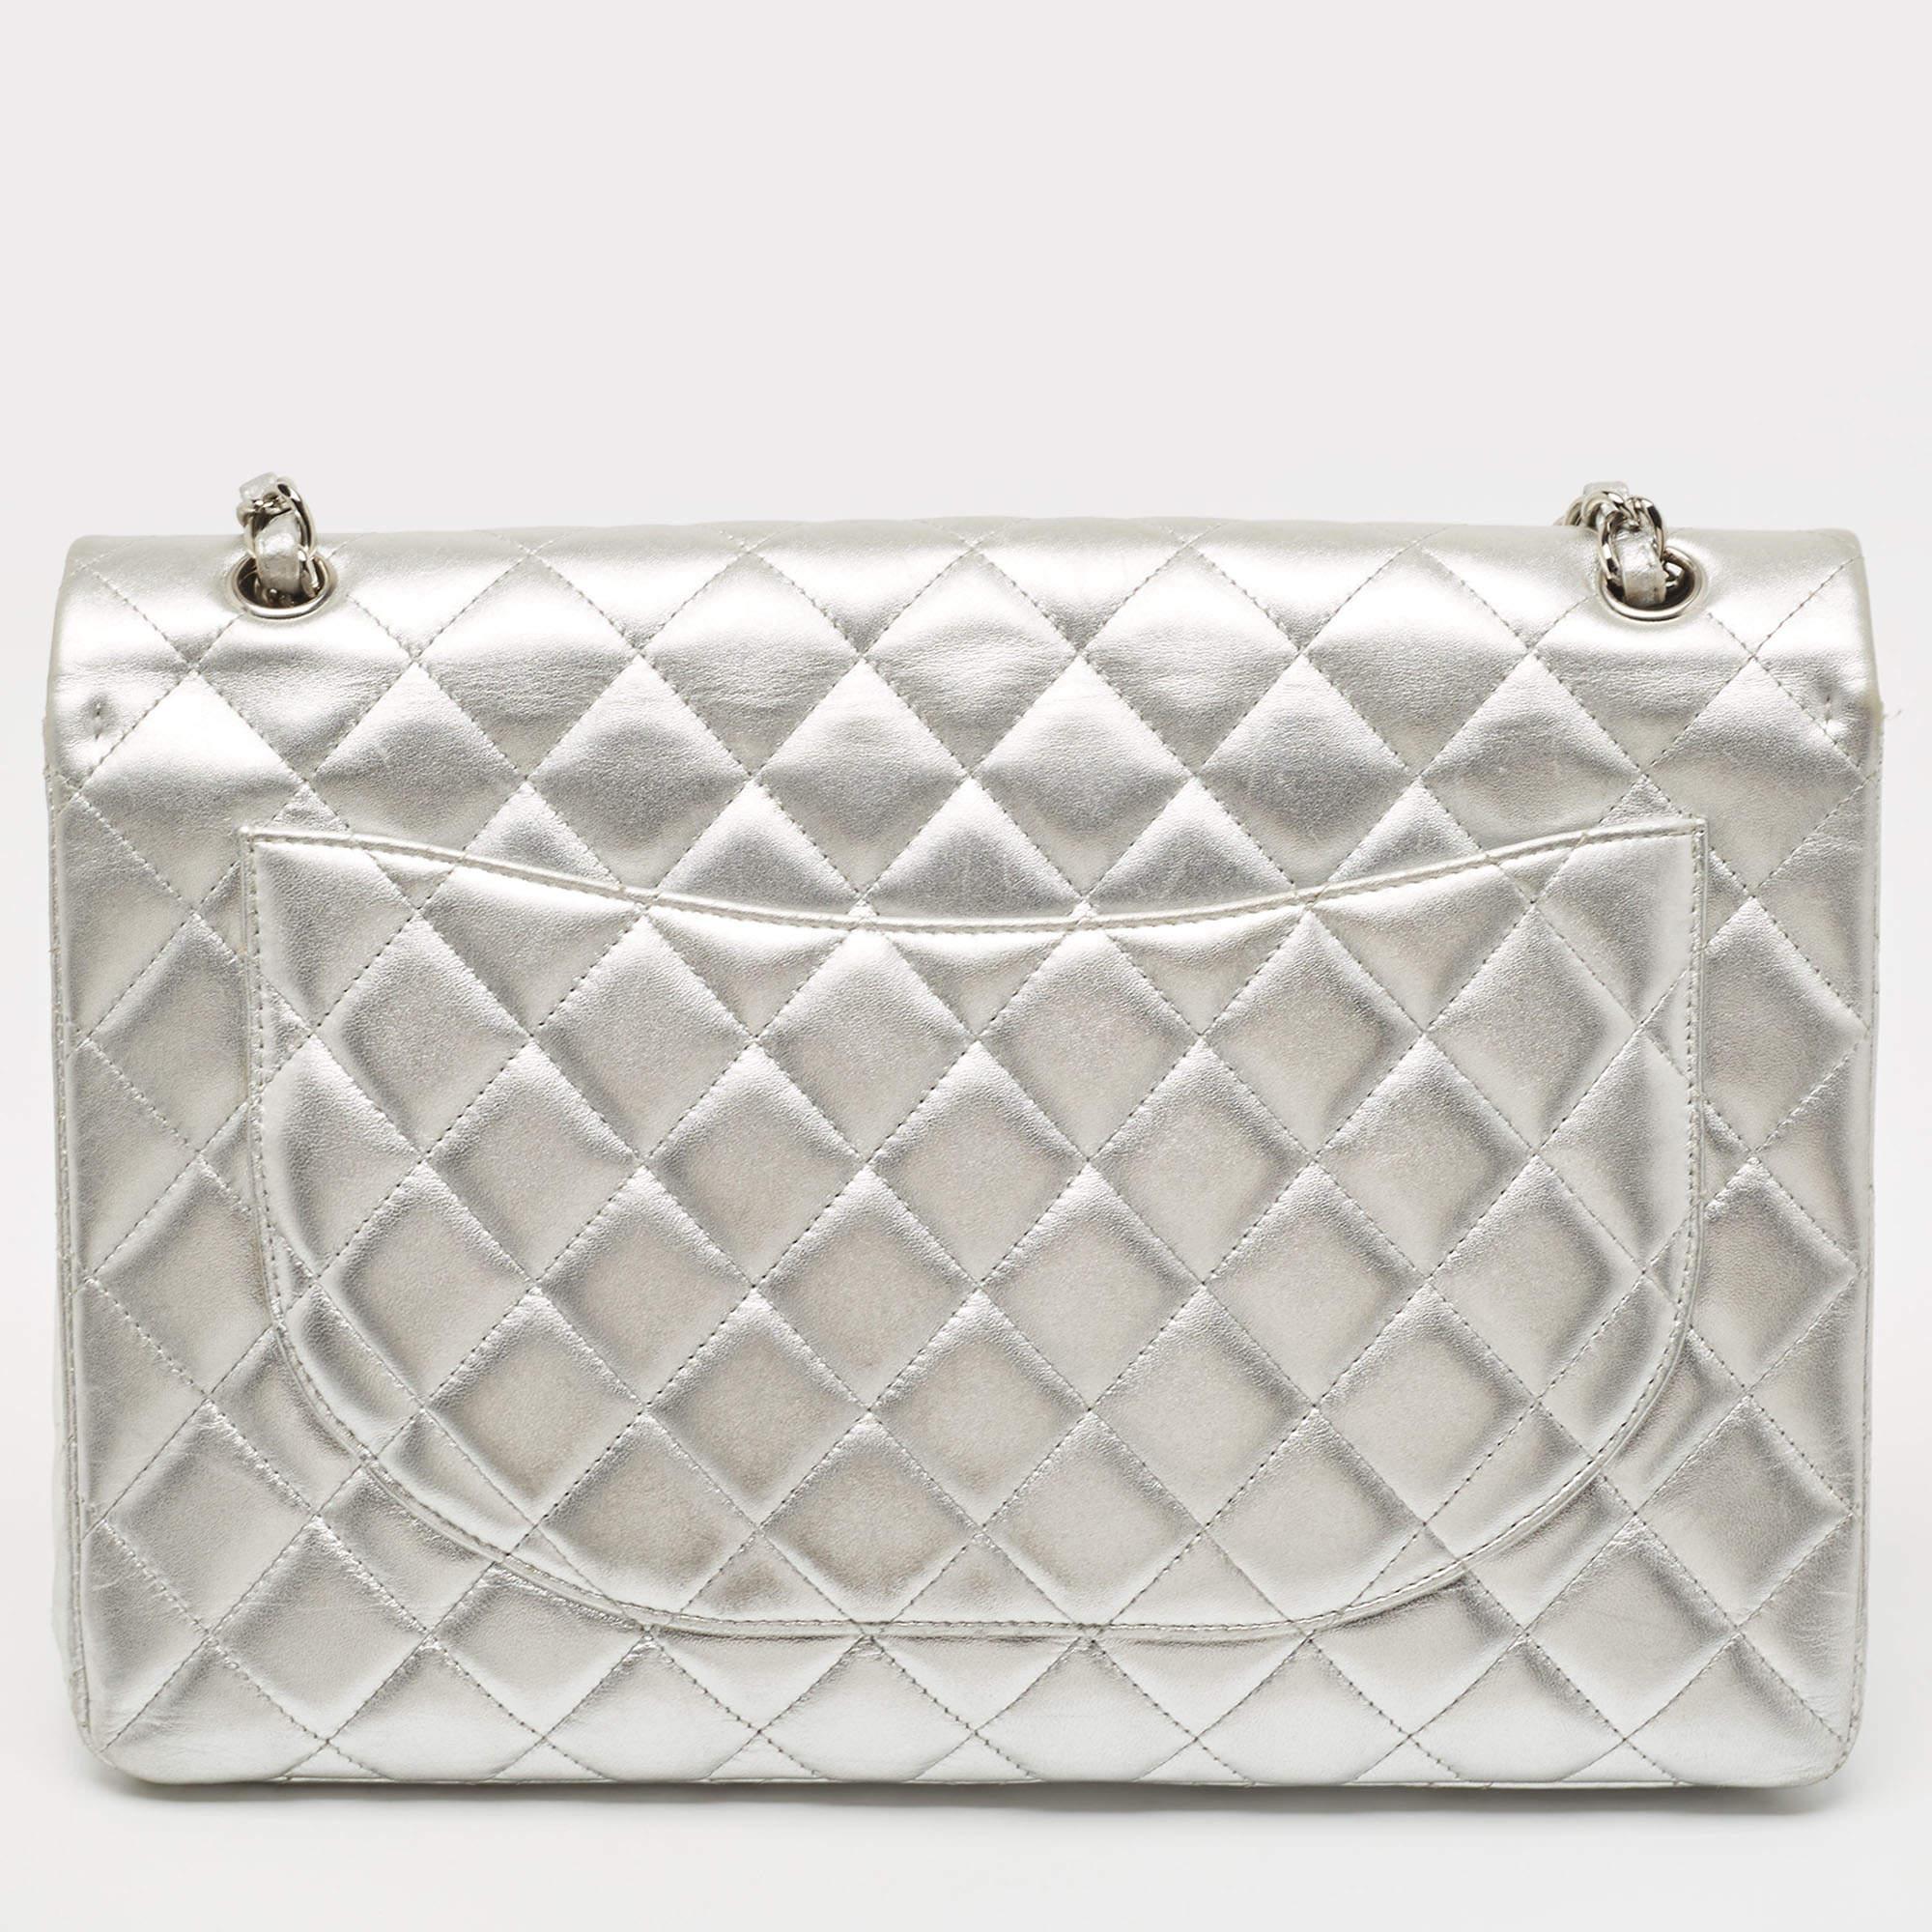 Chanel Silver Quilted Lambskin Leather Maxi Classic Single Flap Bag For Sale 4